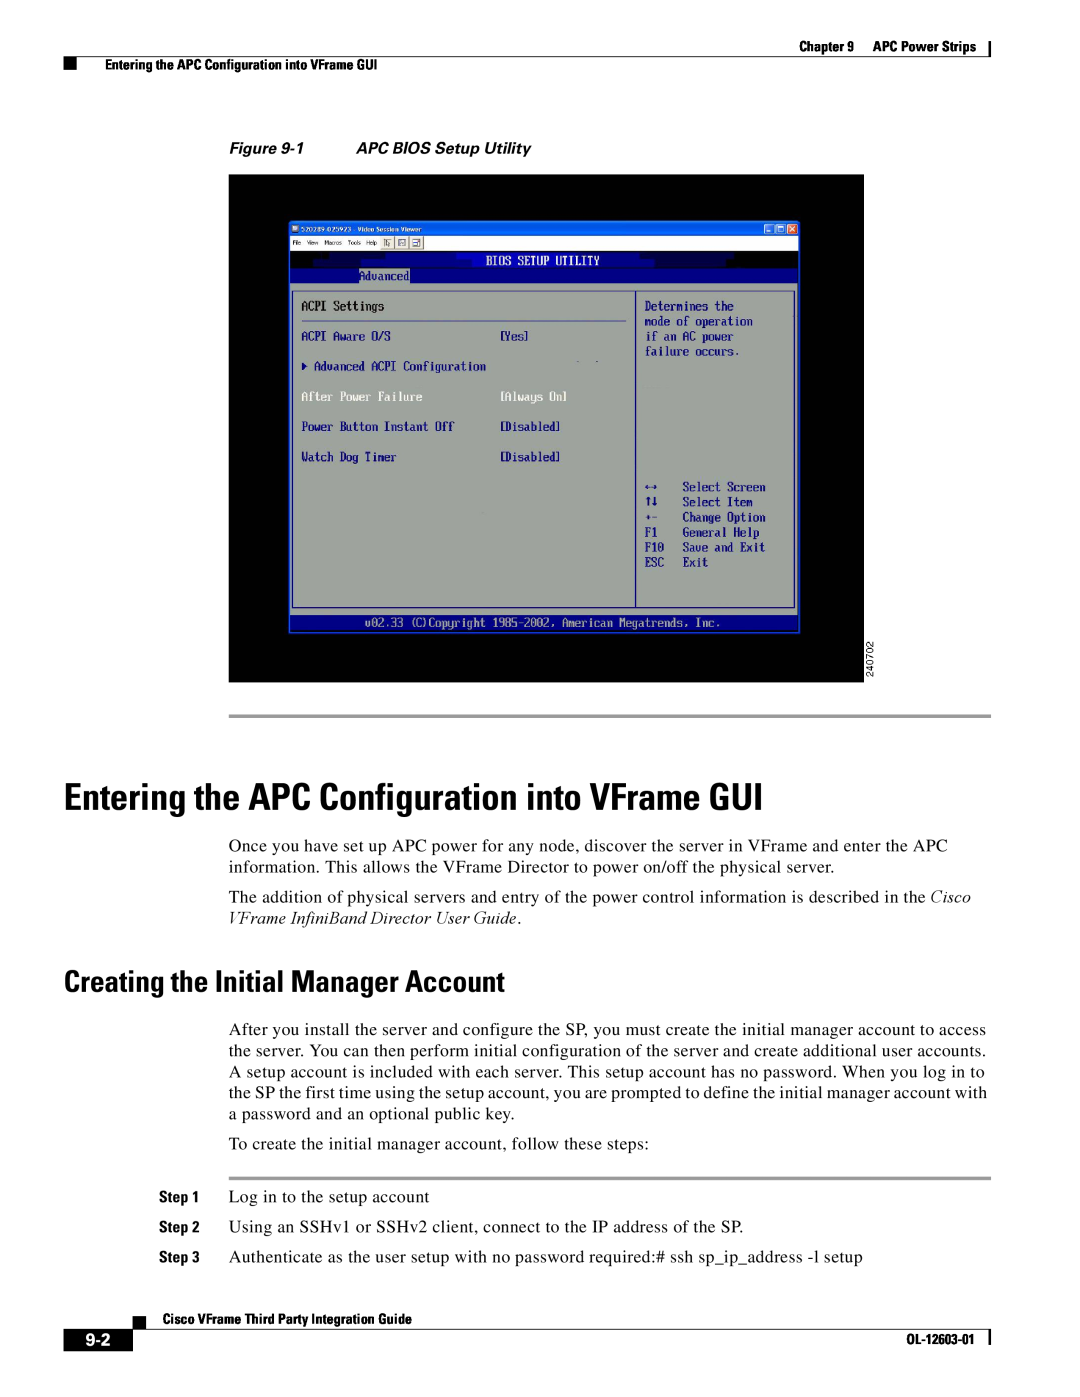 Cisco Systems OL-12603-01 manual Entering the APC Configuration into VFrame GUI, Creating the Initial Manager Account 